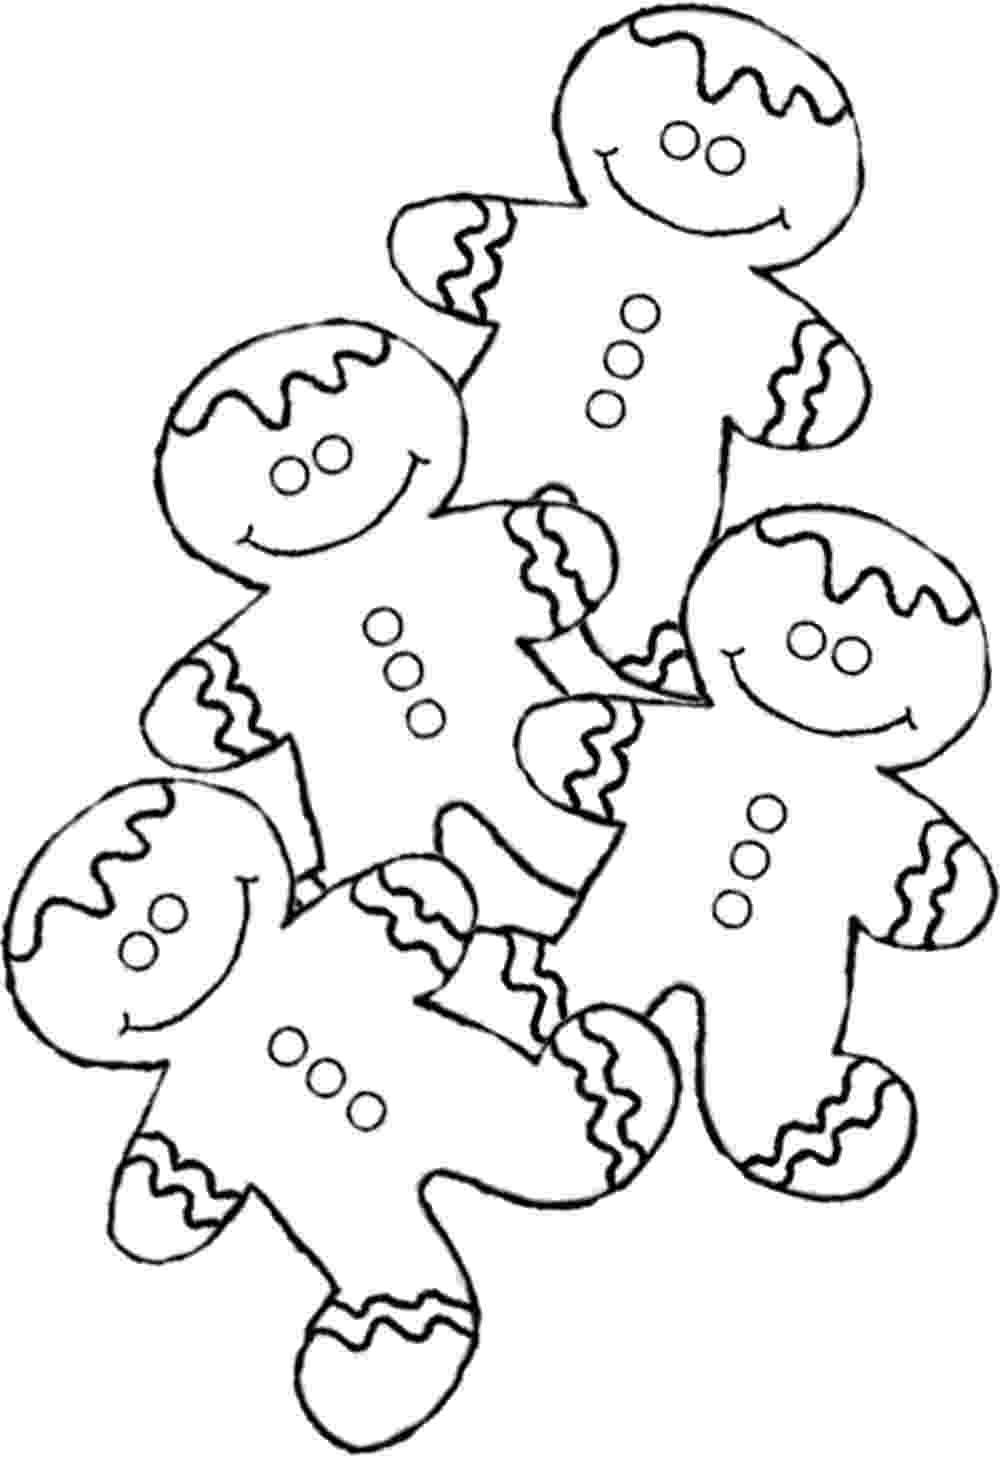 gingerbread color free printable gingerbread man coloring pages for kids gingerbread color 